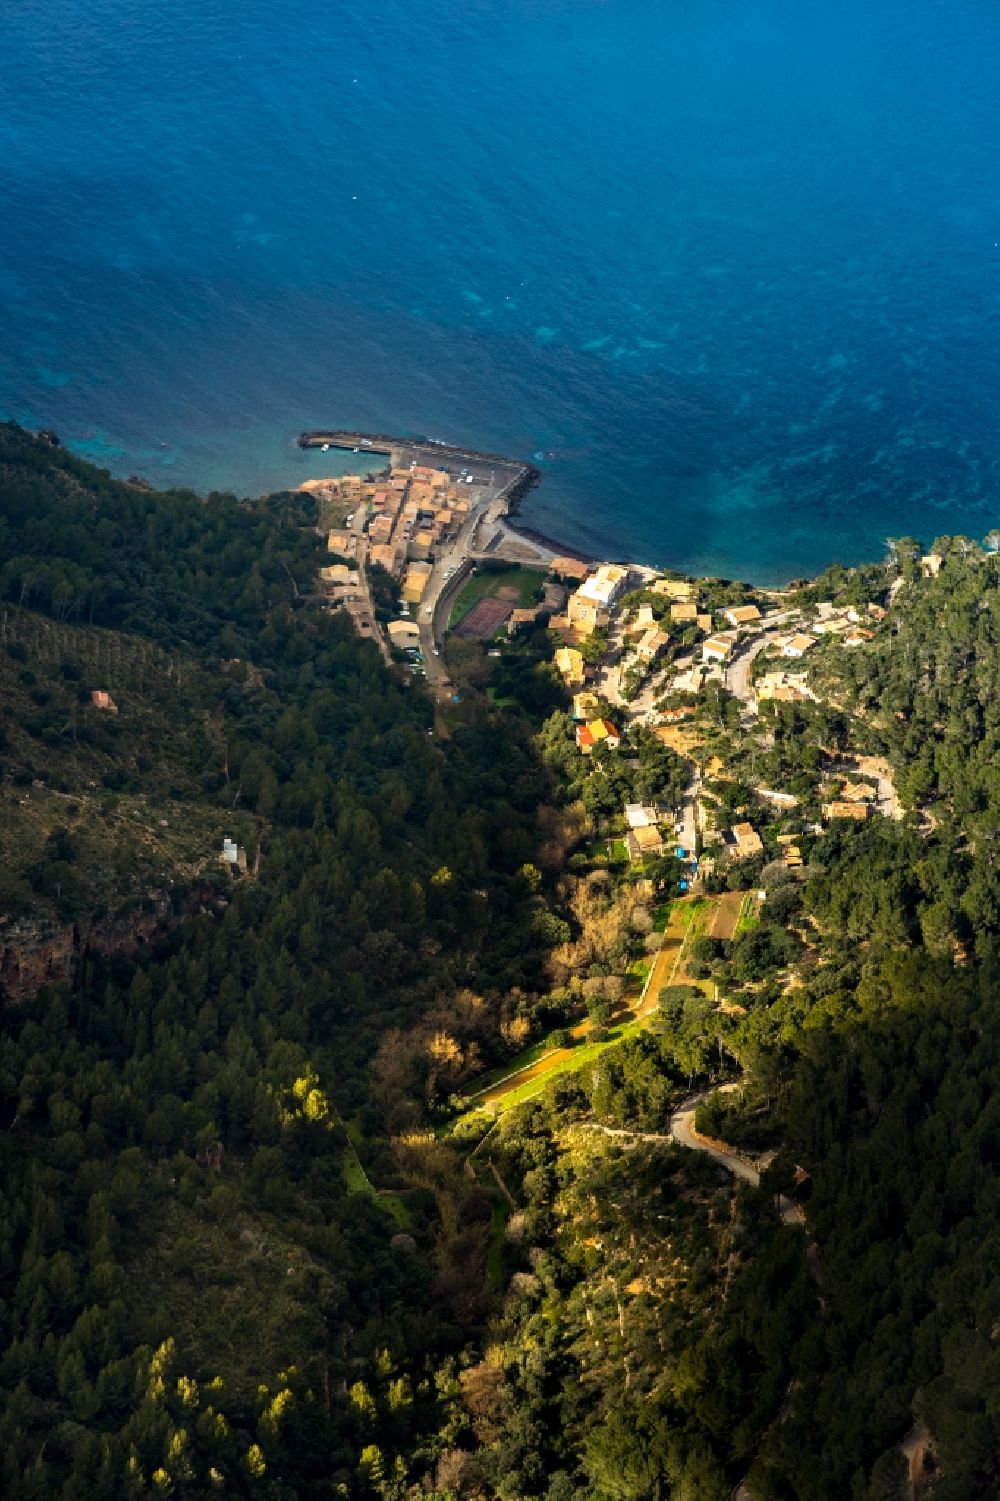 Valldemossa from the bird's eye view: Surrounded by forest and forest areas center of the streets and houses and residential areas in Valldemossa in Balearic island of Mallorca, Spain